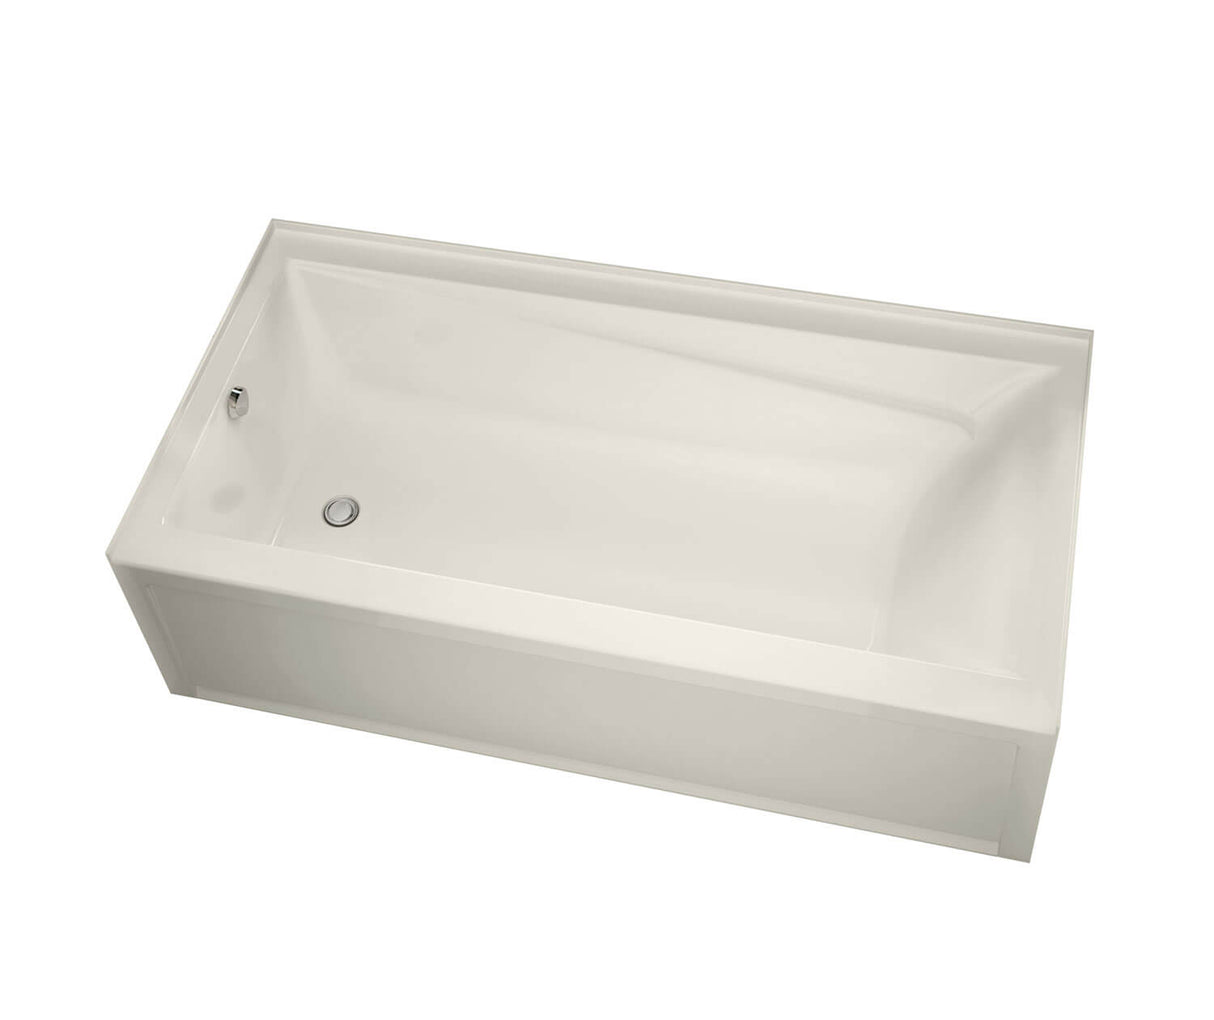 MAAX 106180-L-003-007 Exhibit 6636 IFS AFR Acrylic Alcove Left-Hand Drain Whirlpool Bathtub in Biscuit